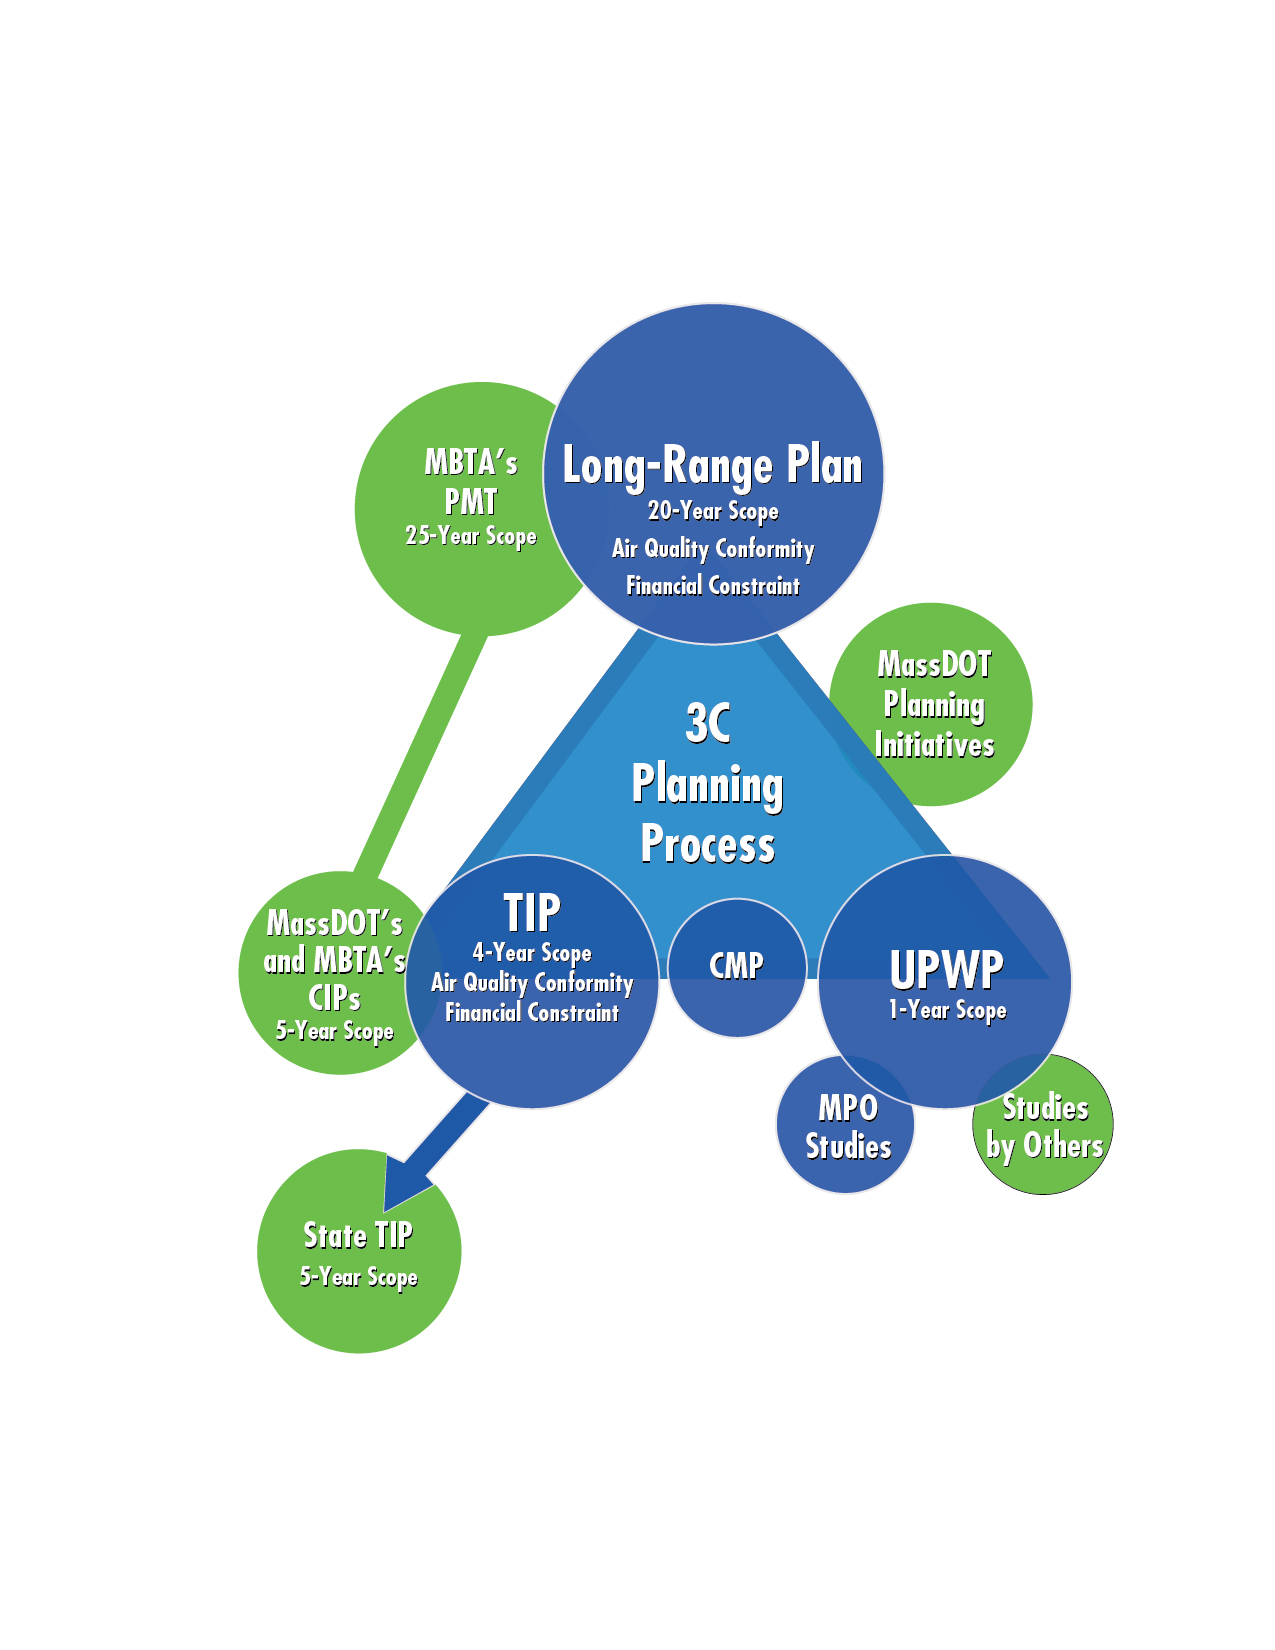 Figure 2 is a design that illustrates the interrelationship of the MPO certification documents (i.e., the Long-Range Transportation Plan, Transportation Improvement Program, and Unified Planning Work Program) to other MPO planning documents, including MassDOT planning initiatives; MPO studies and those of others; Congestion Management Process; state TIP; MassDOT’s and MBTA’s Capital Investment Program; and MBTA’s Program for Mass Transportation.